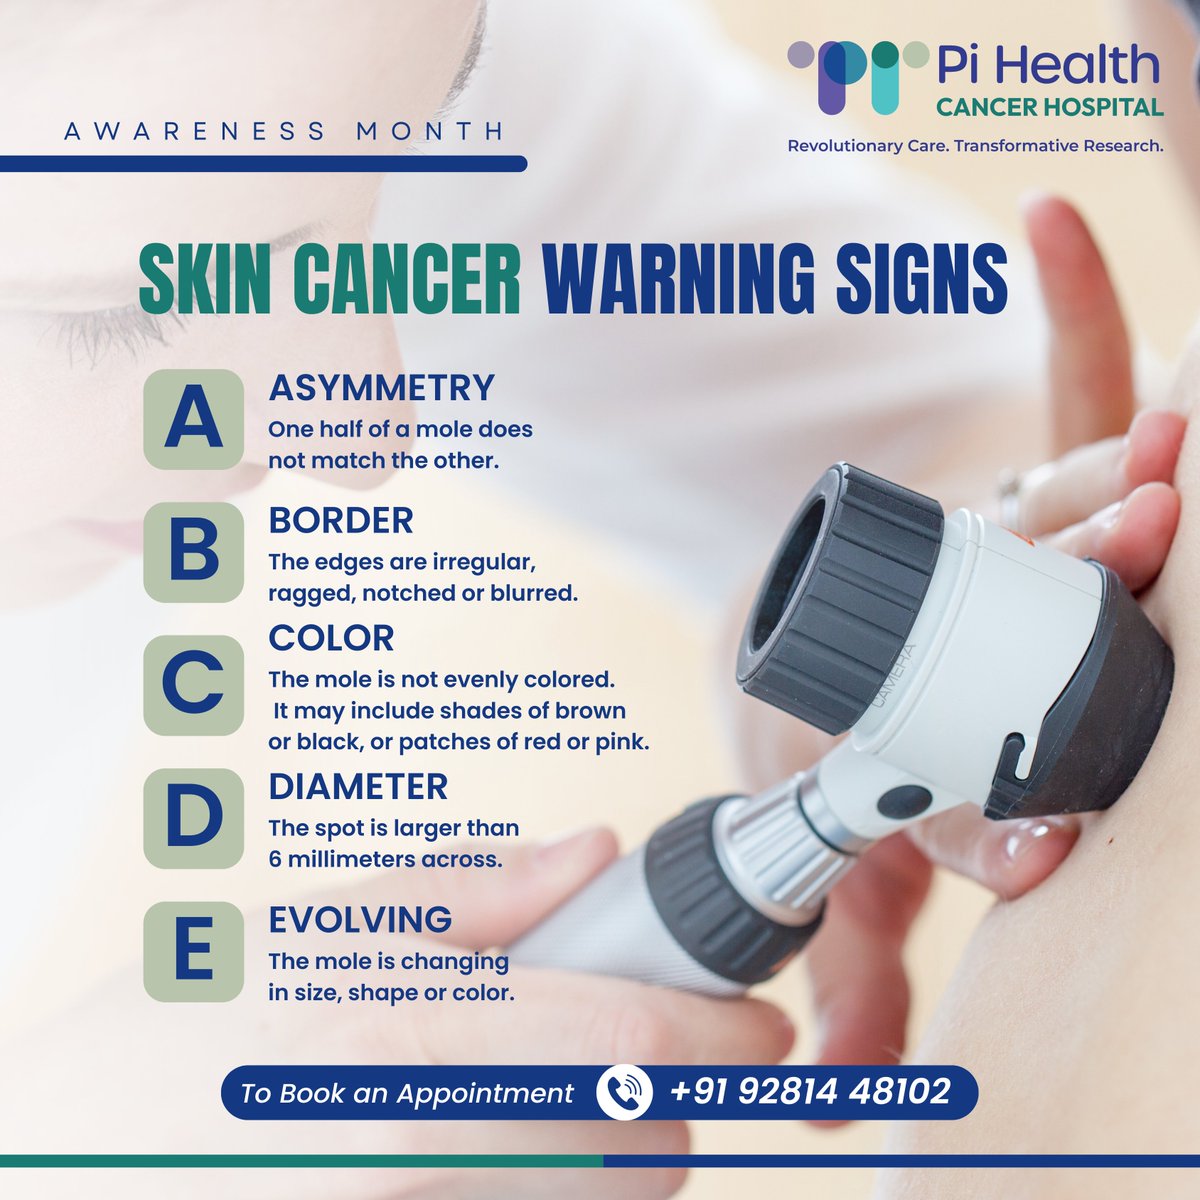 Skin cancer is a disease characterized by the abnormal growth of skin cells, leading to the formation of malignant tumors on the skin. It encompasses various types, such as basal cell carcinoma, squamous cell carcinoma, and melanoma.
To learn more,
Go to pihealthcancerhospital.com